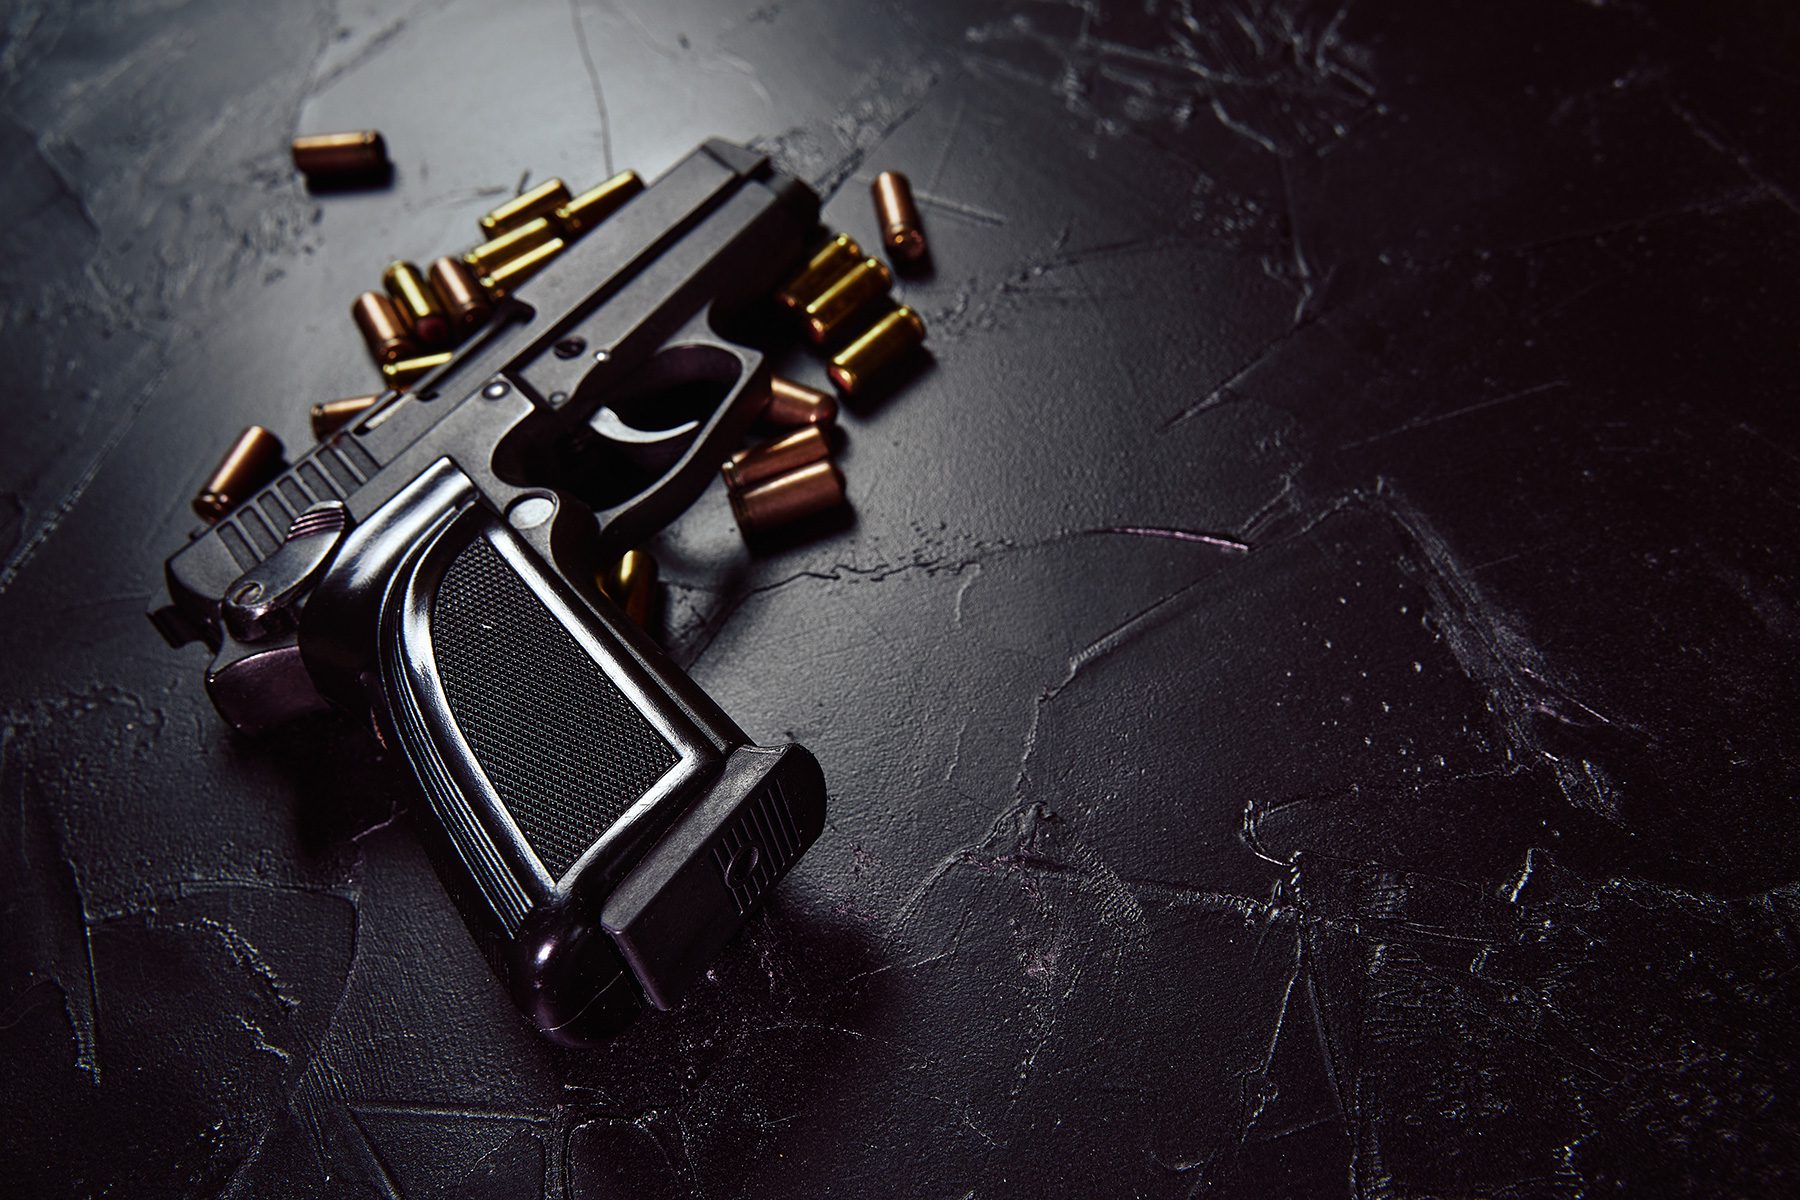 A Six-Year-Old Shot His Teacher. Who Is Legally Responsible?